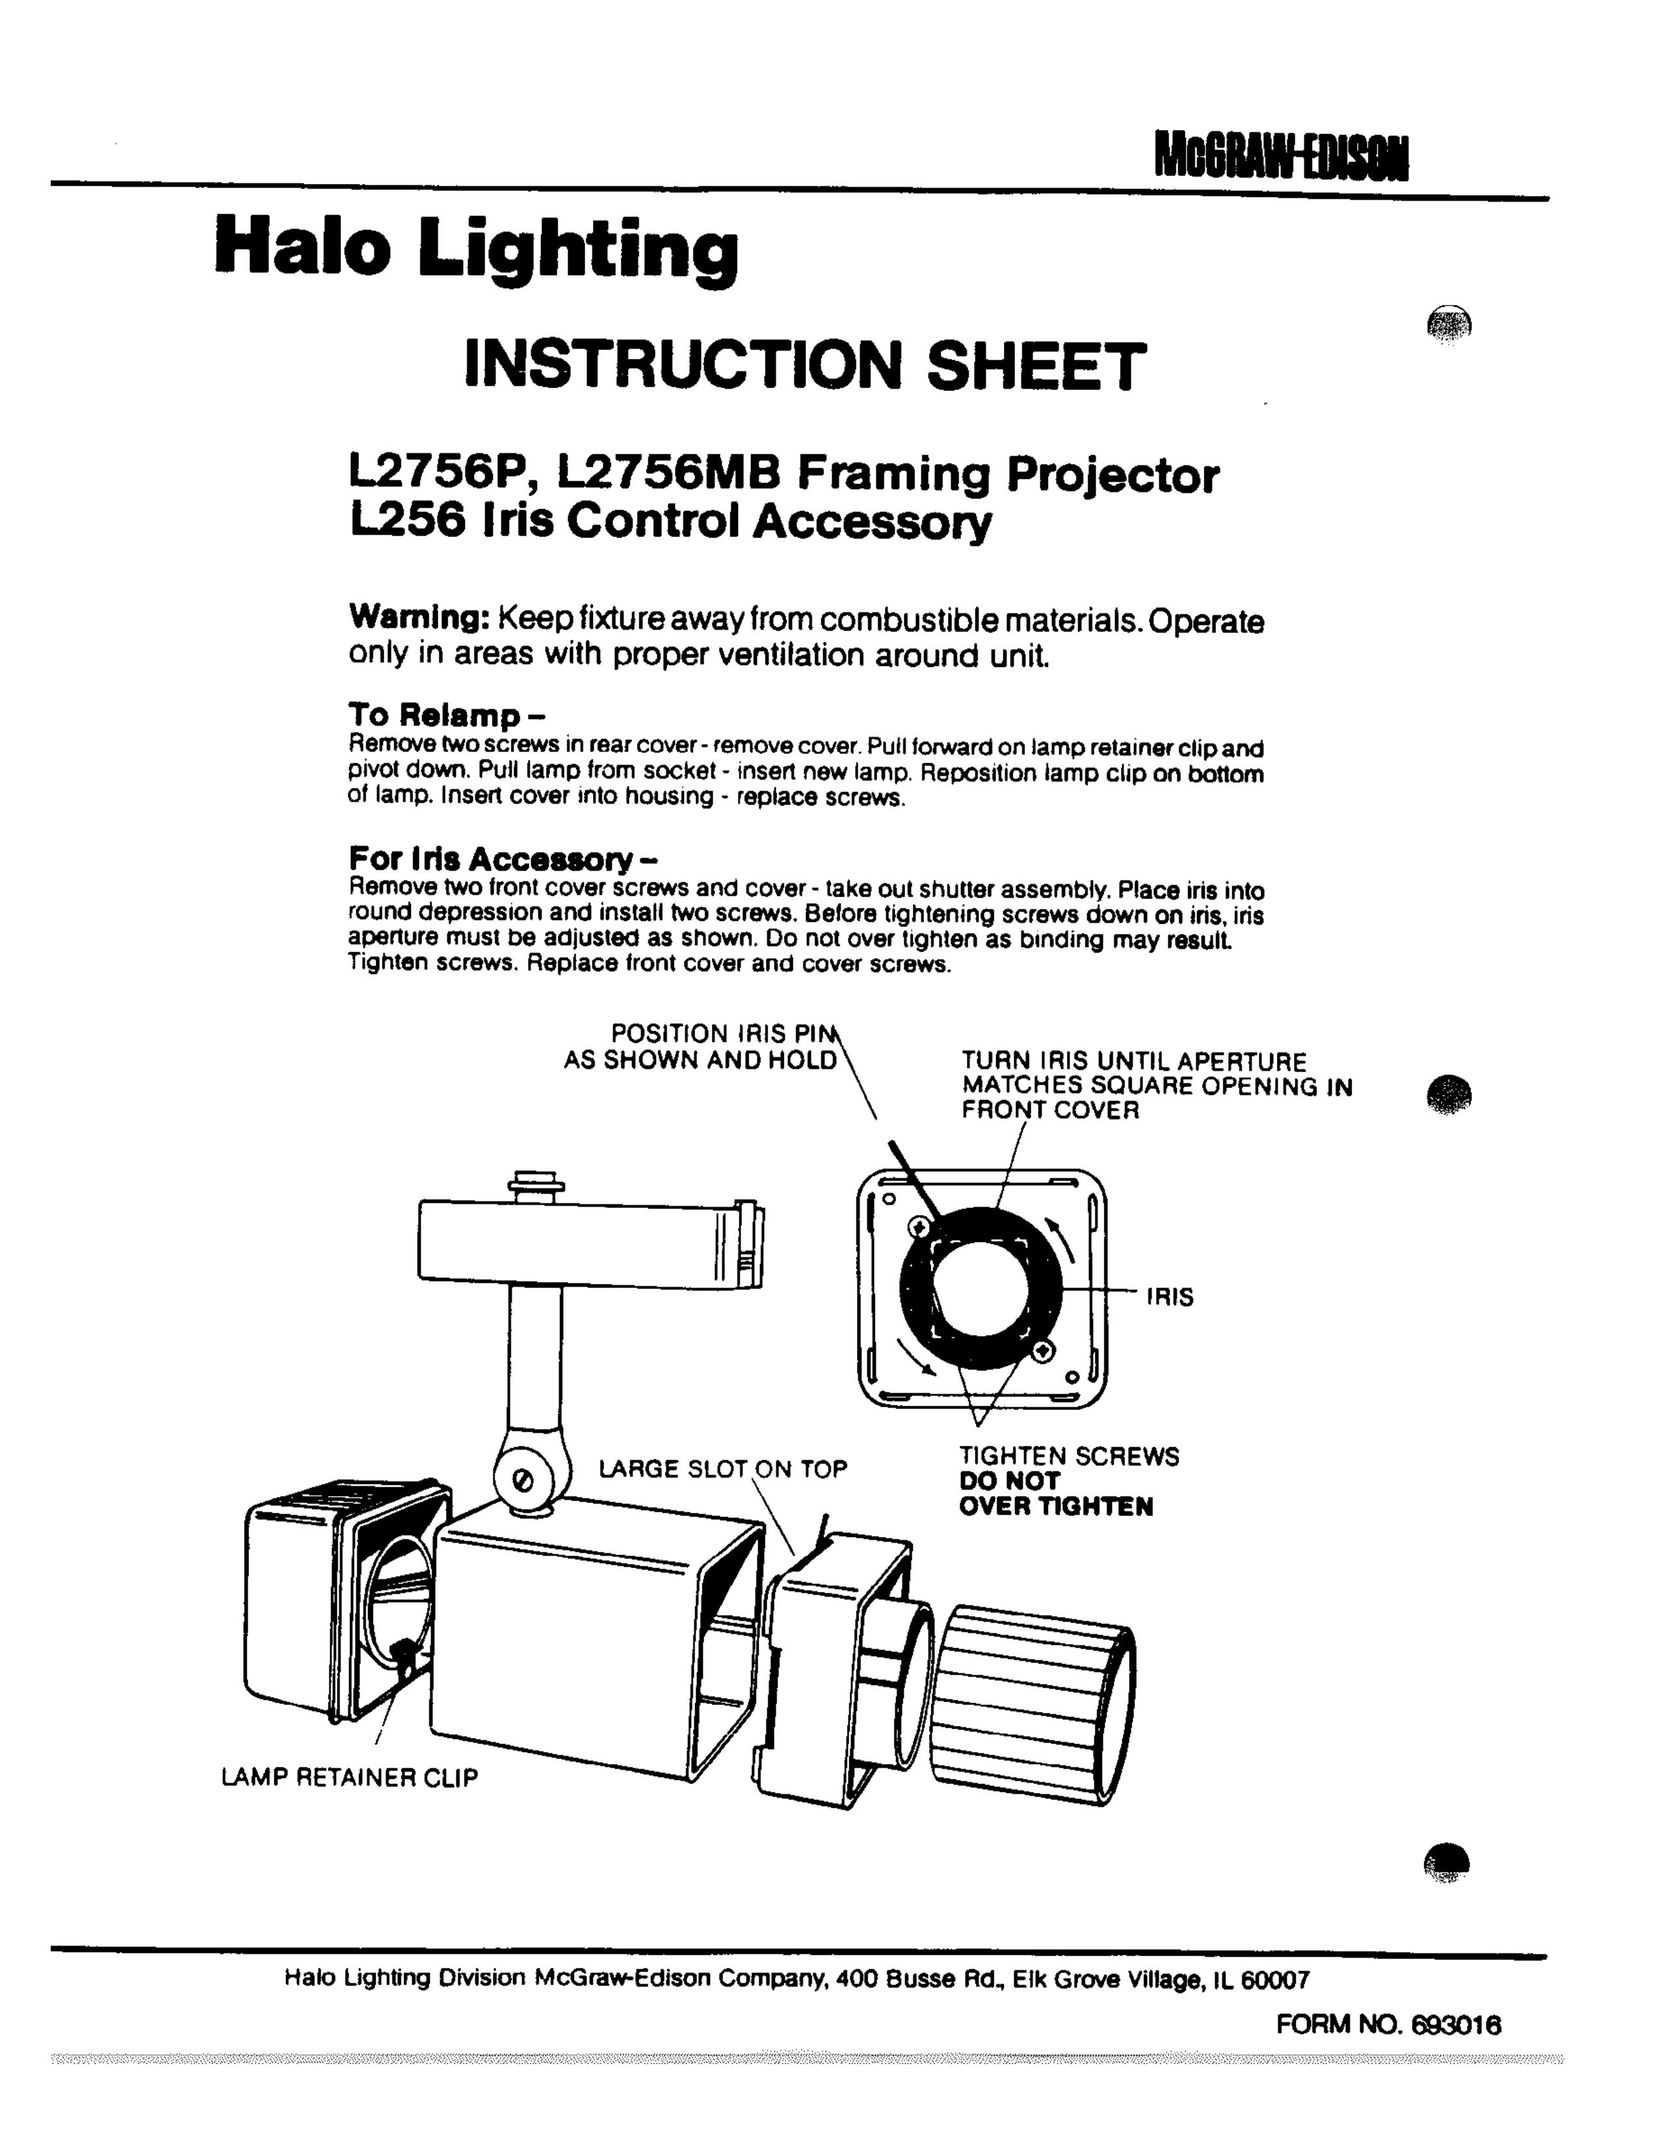 Halo Lighting System L2756MB Projector User Manual